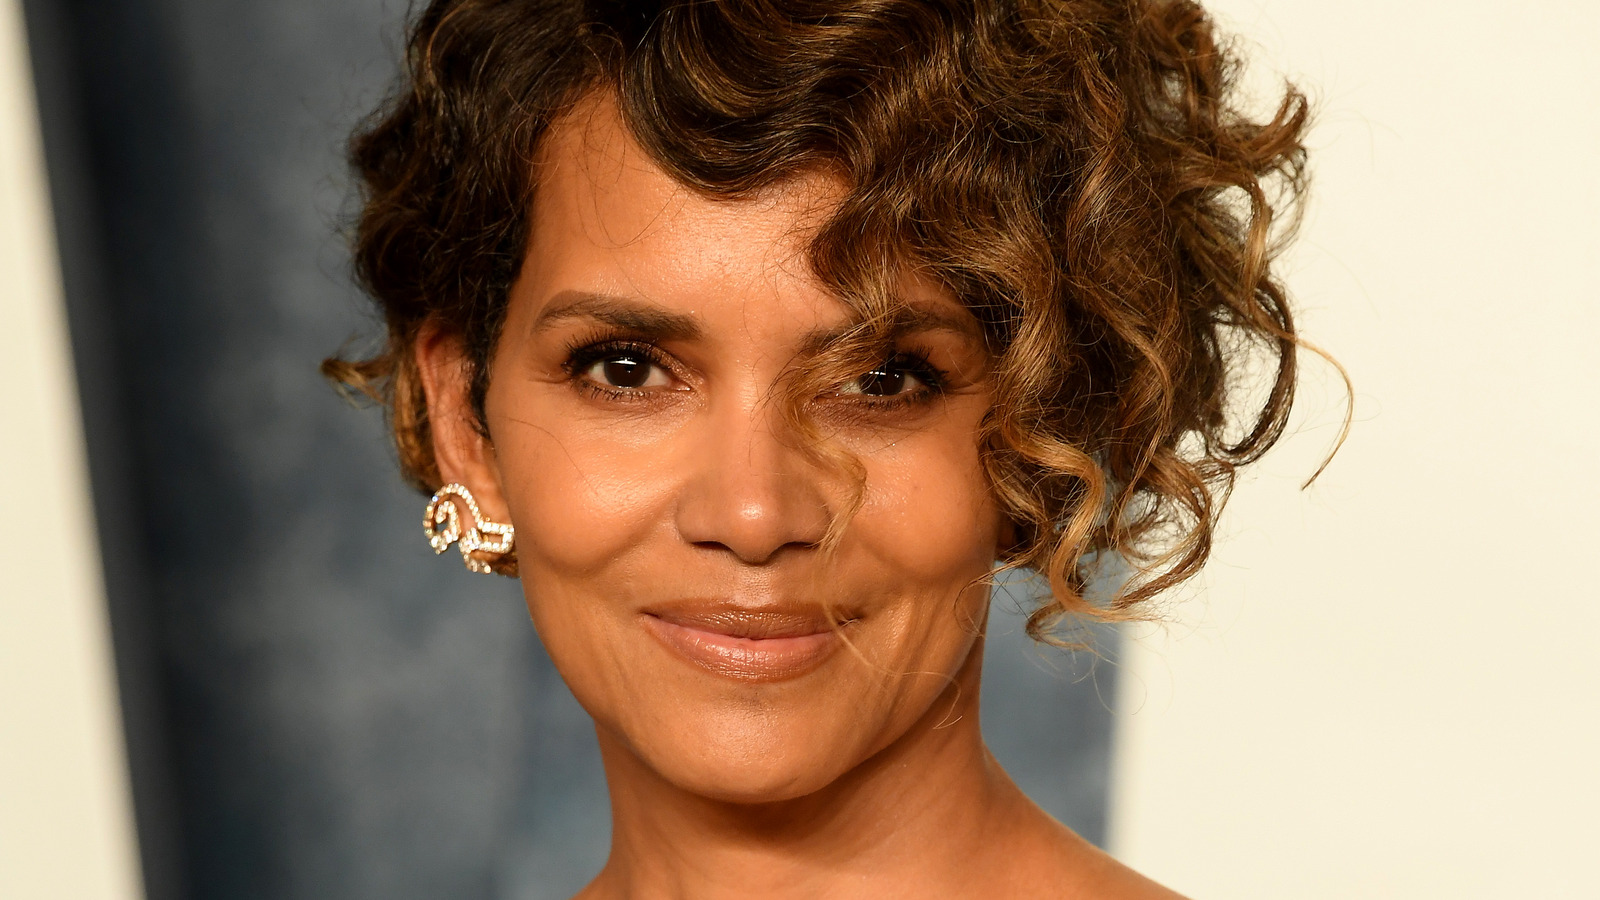 Halle Berry: David Justice on Halle Berry in 2015: I never hit her